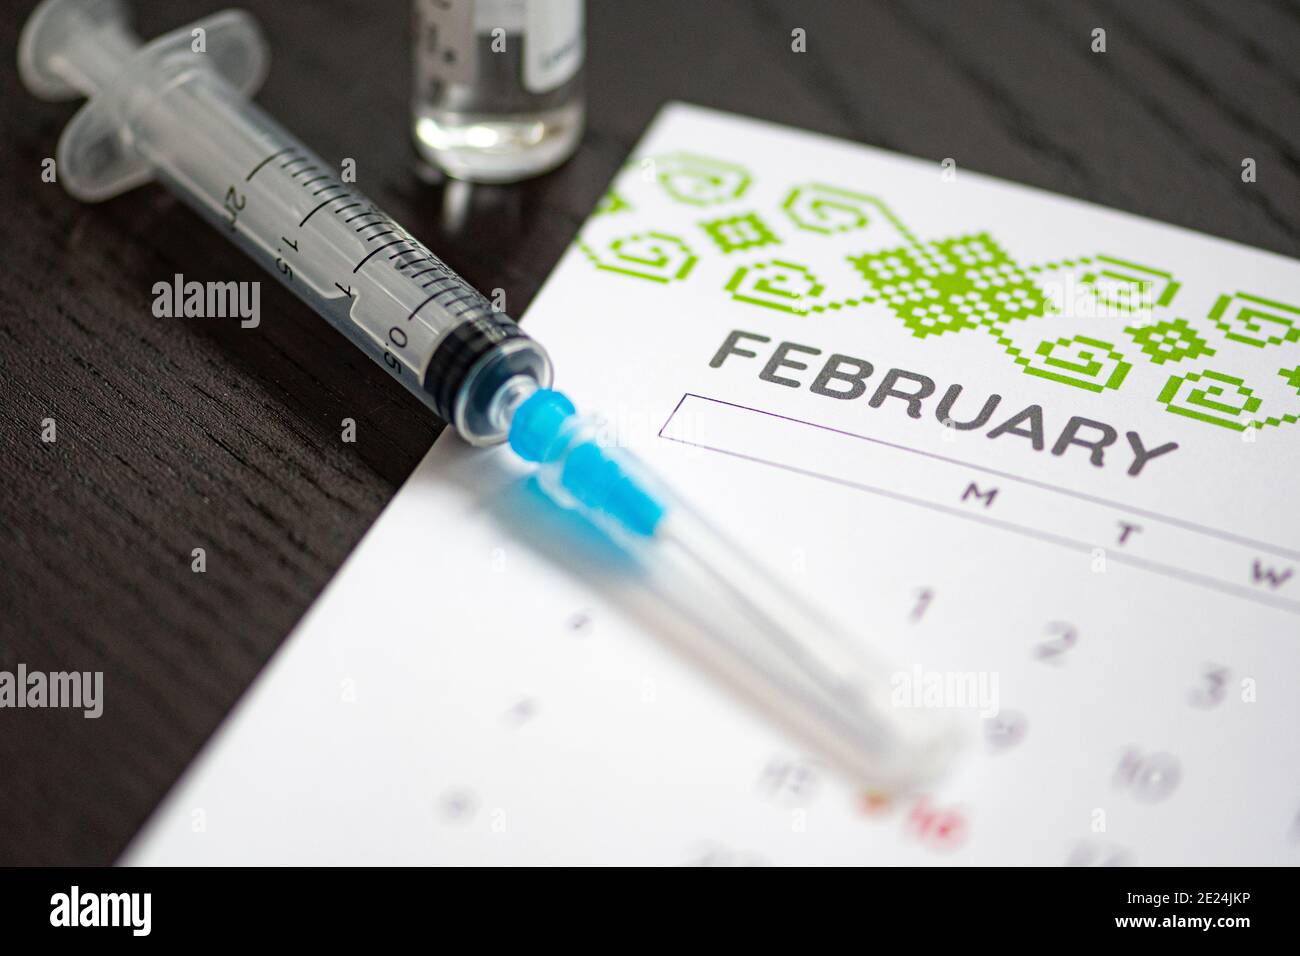 Syringe, vial and calendar with month of February on a black table ready to be used. Covid or Coronavirus vaccine background Stock Photo